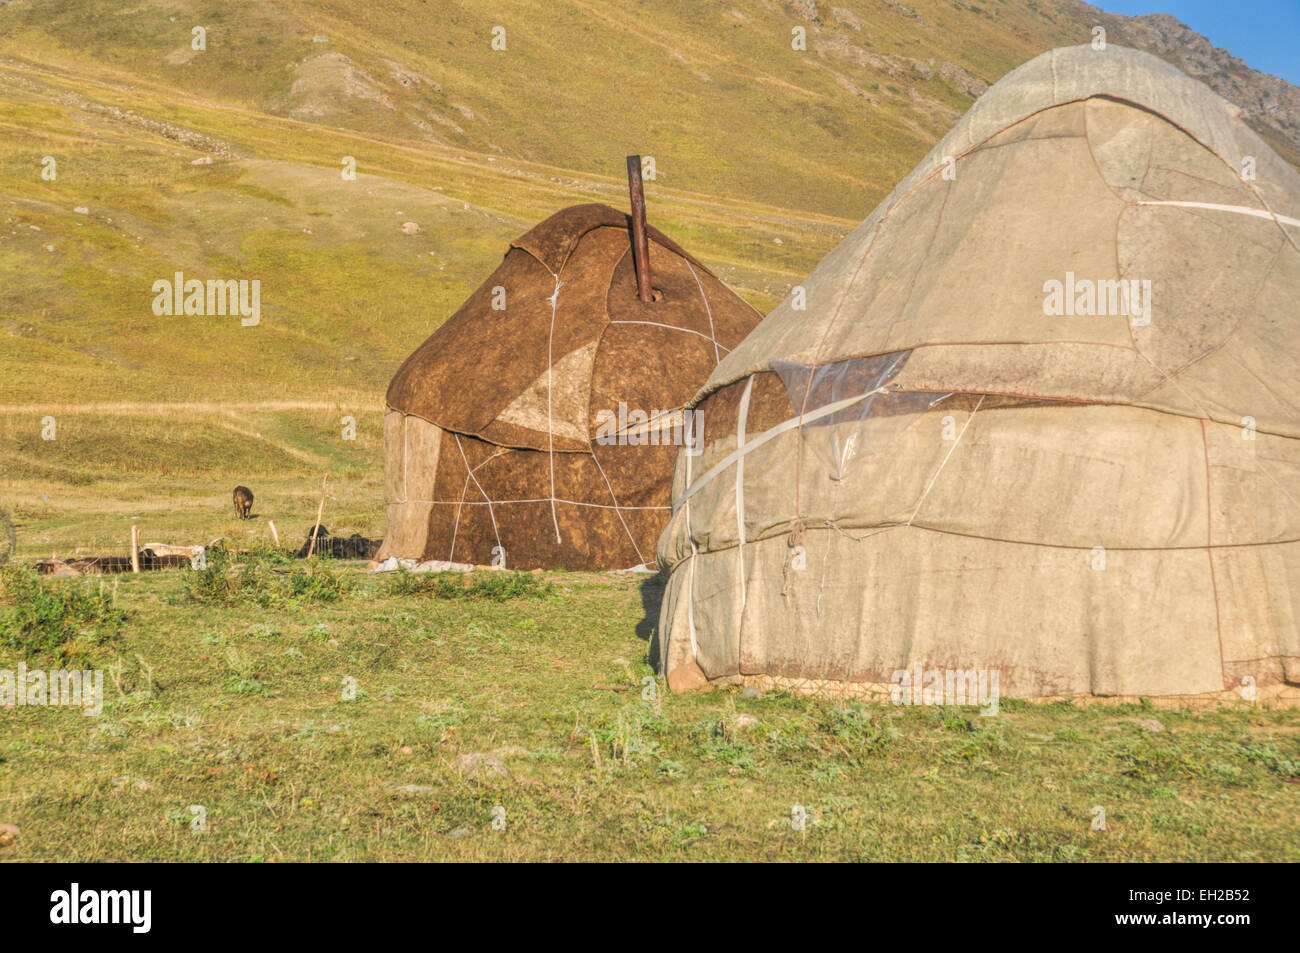 Nomadic settlements with yurts on green grasslands in Kyrgyzstan Stock Photo